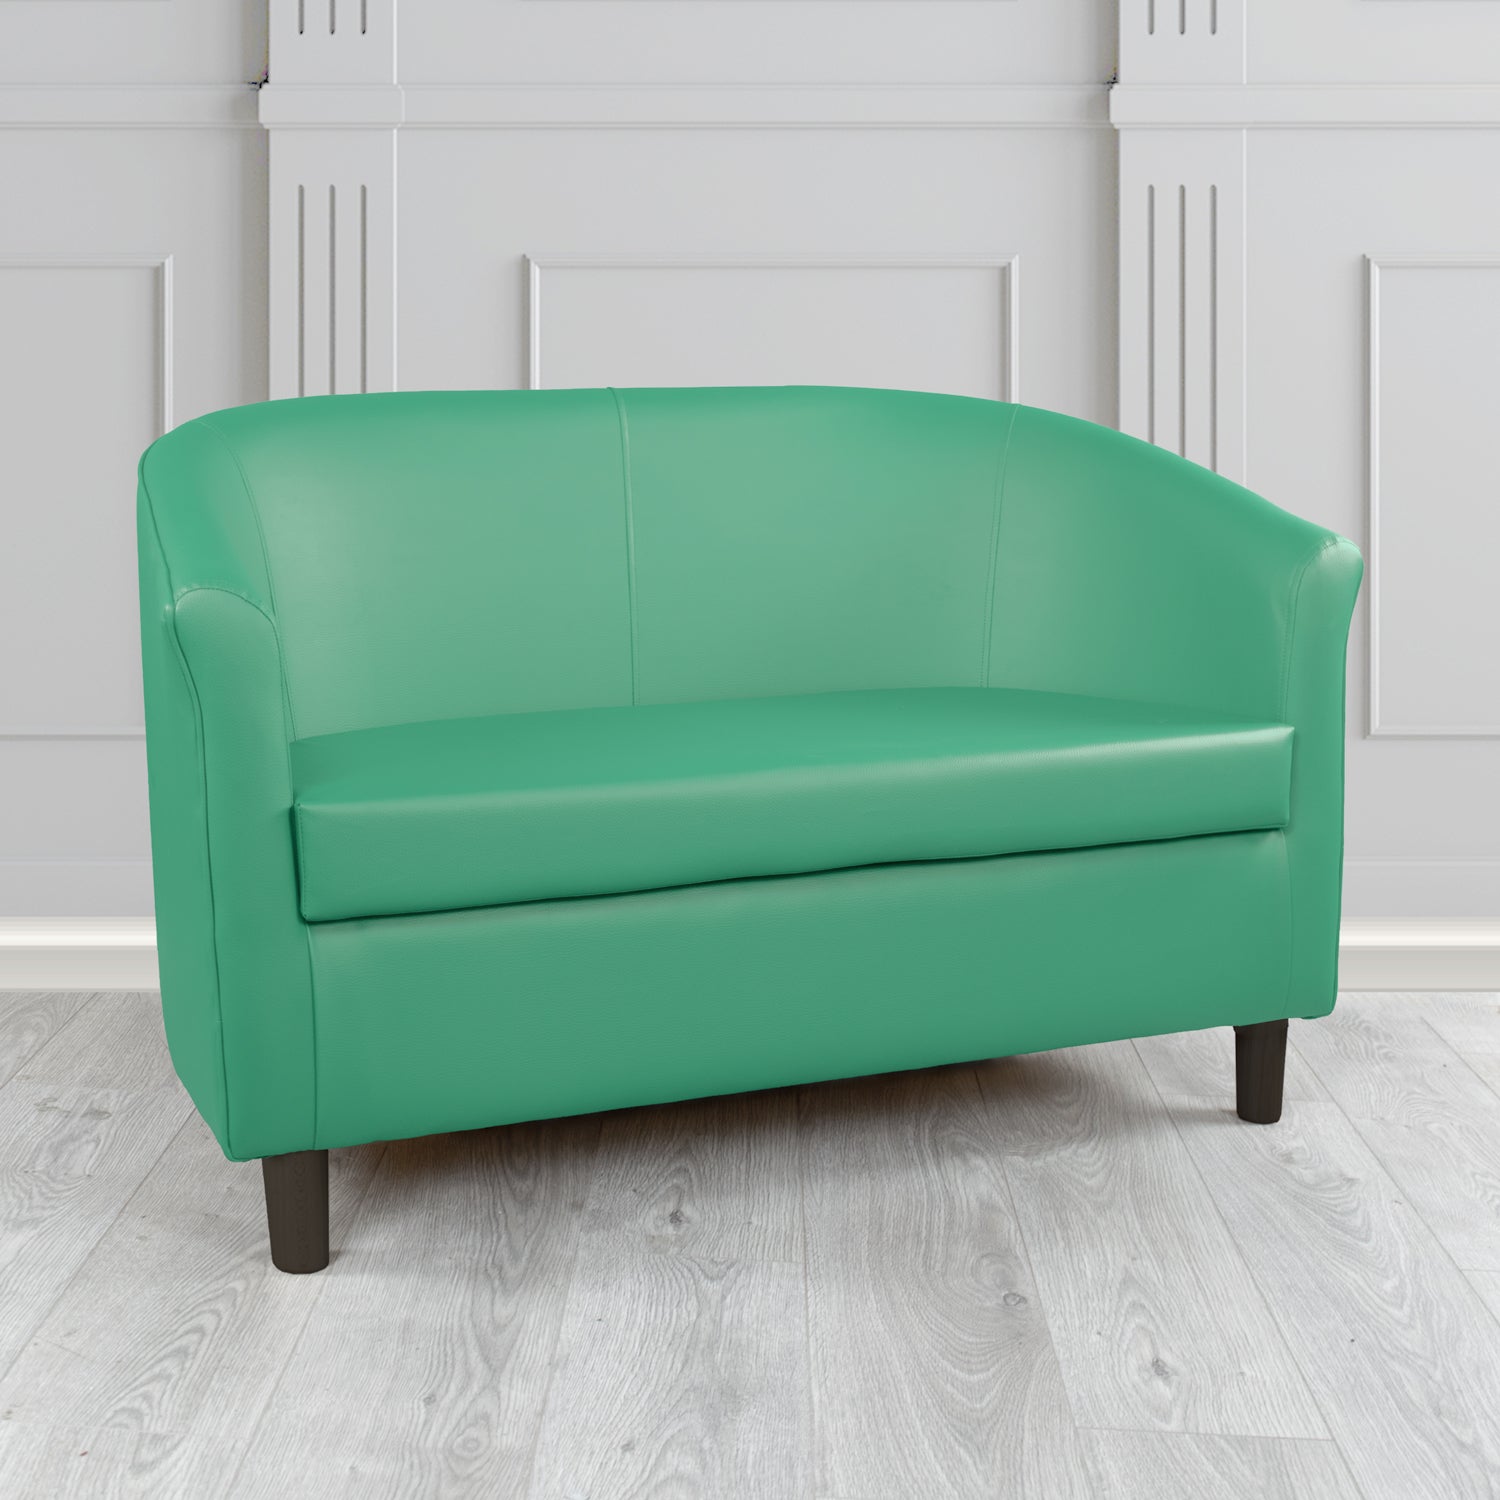 Tuscany Just Colour Applemint Crib 5 Faux Leather 2 Seater Tub Sofa - The Tub Chair Shop